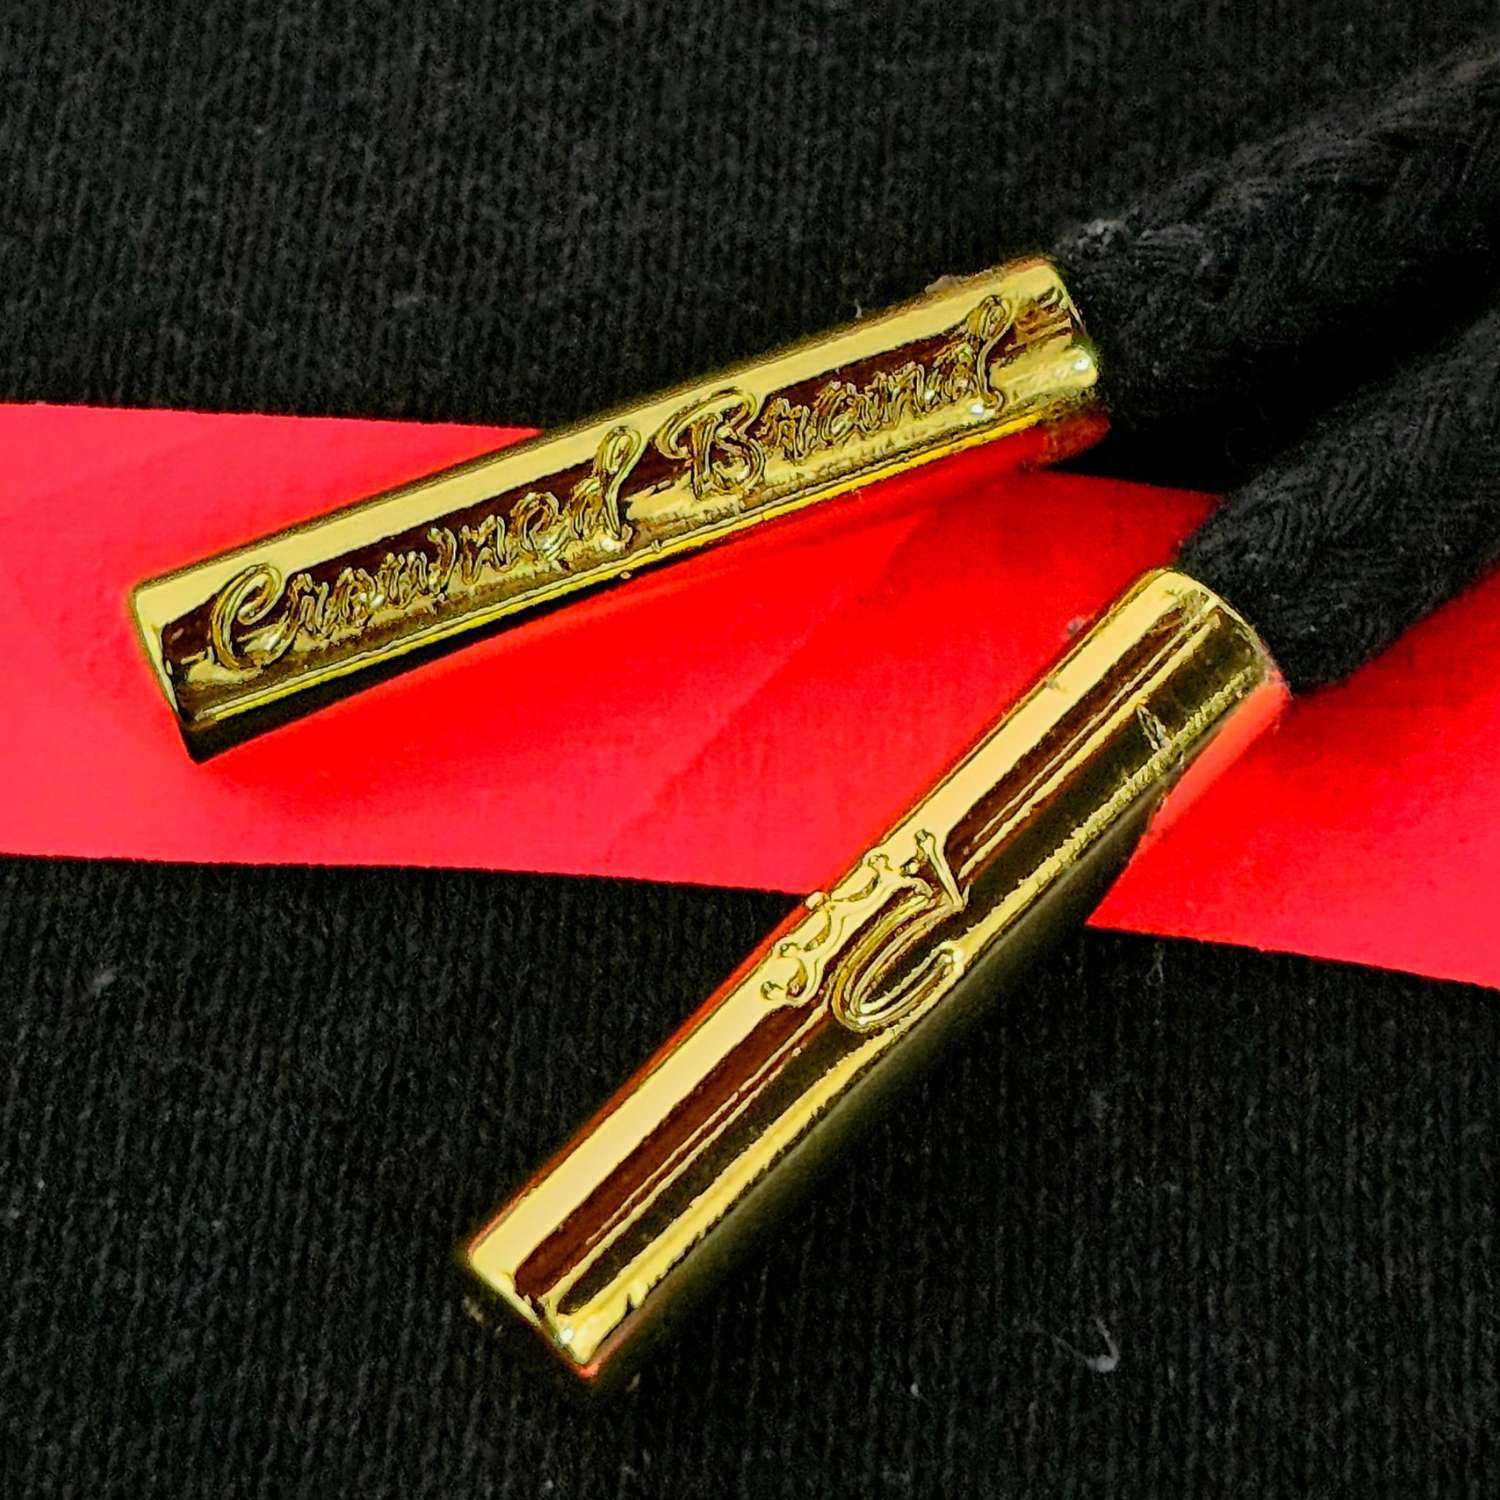 Gold Tips for Laces - aglets - Crowned Brand